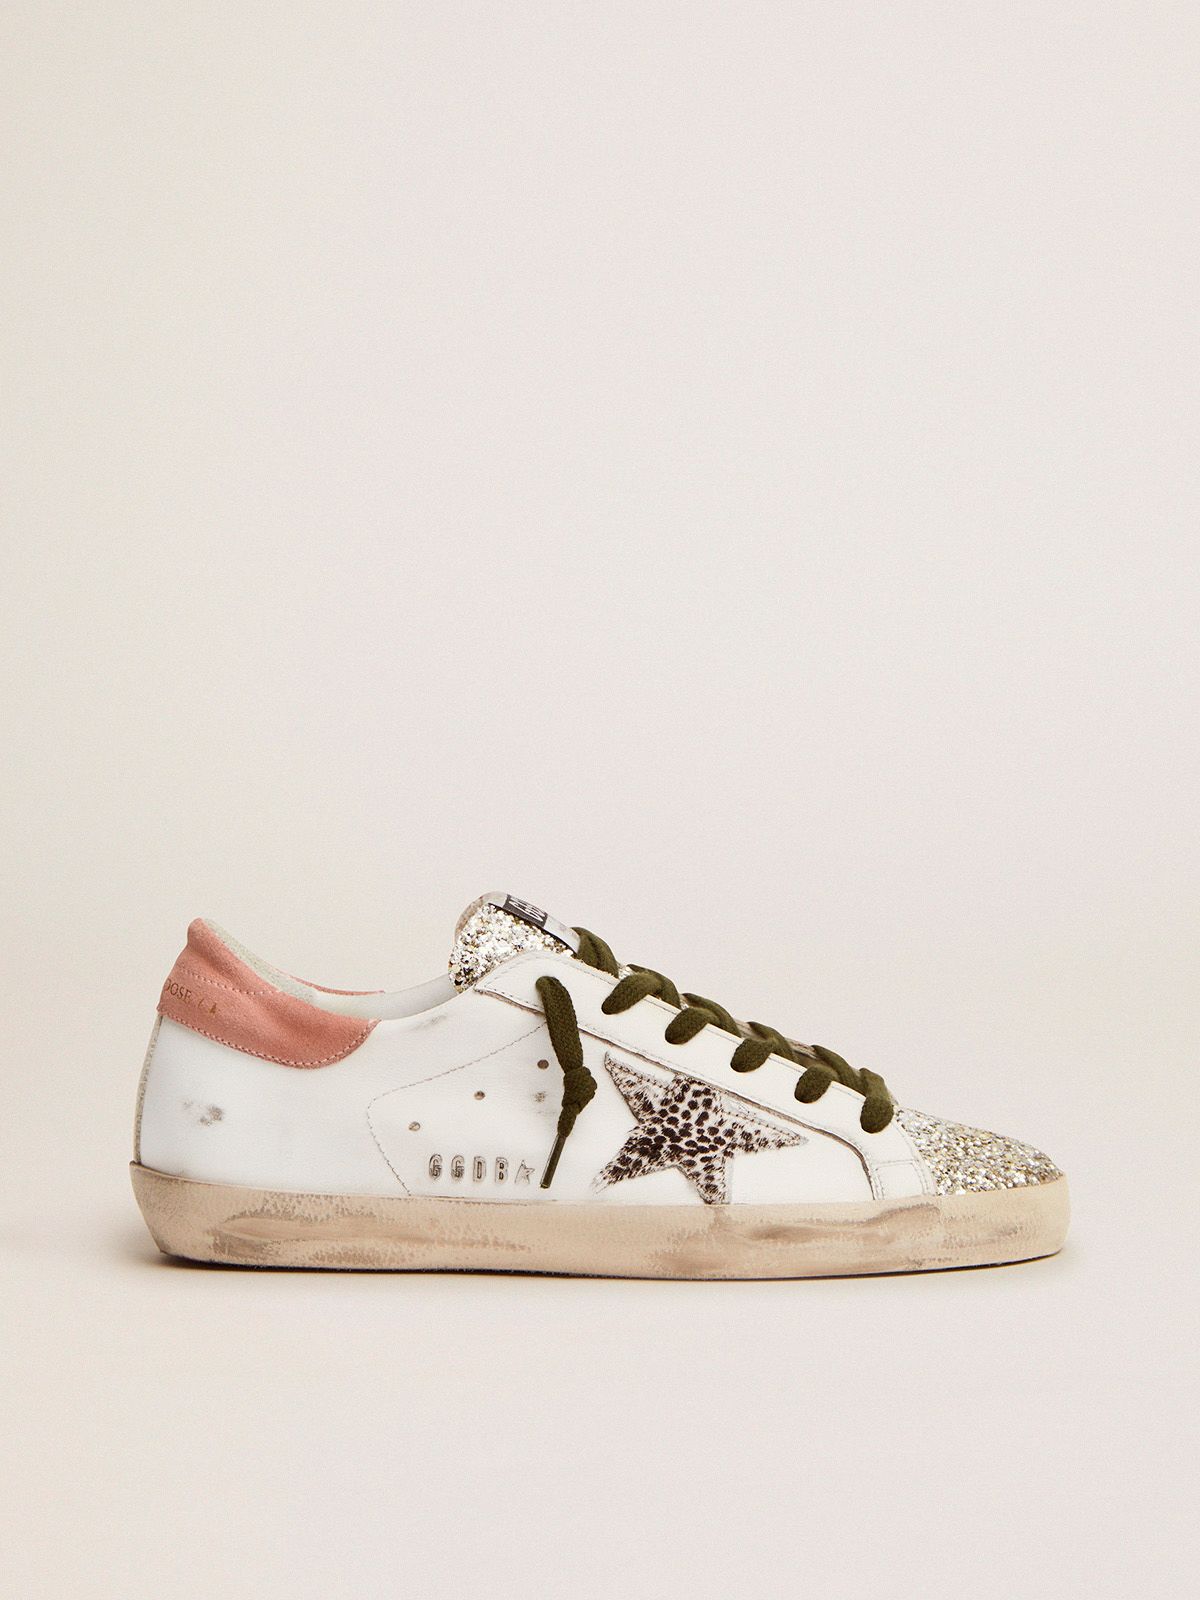 golden goose silver LTD pony animal-print glitter sneakers star skin Super-Star and with